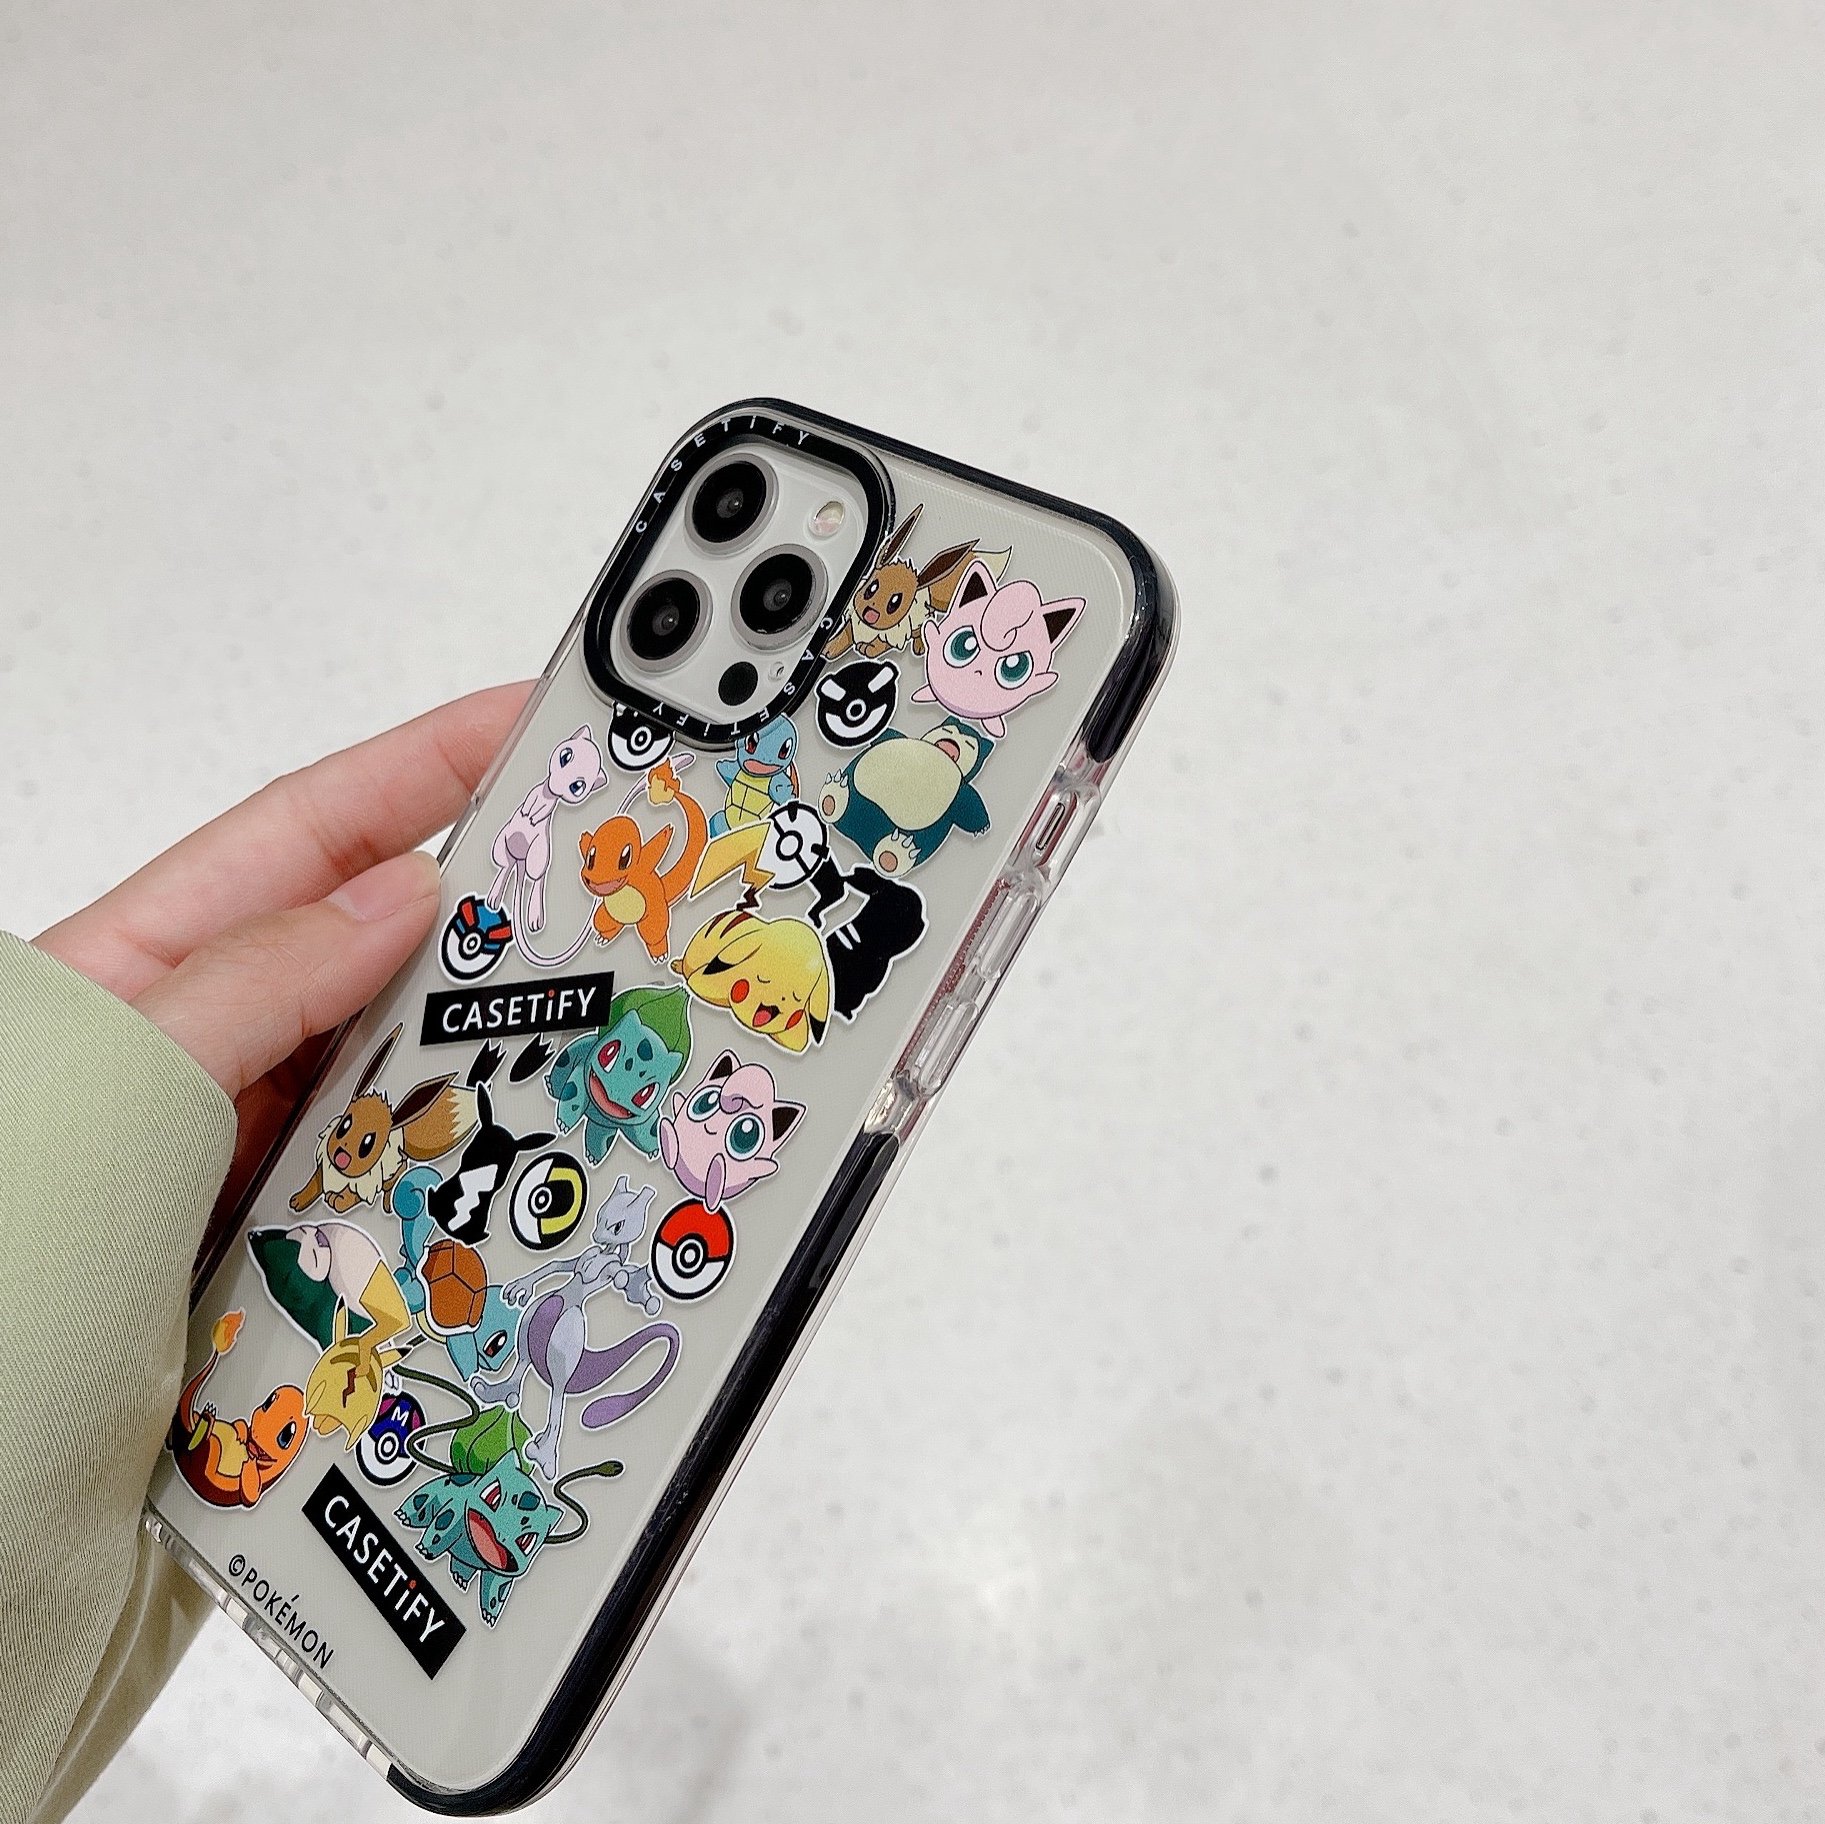 【High Material+CaseTIFY】case iphone 11 pro max case cover iphonoe 6 plus iphone 12 pro max case iphone 7 plus cover iphone 8 plus iphone xr iphone xs max iphone cover 6s iphone se2020 Pokémon phone case